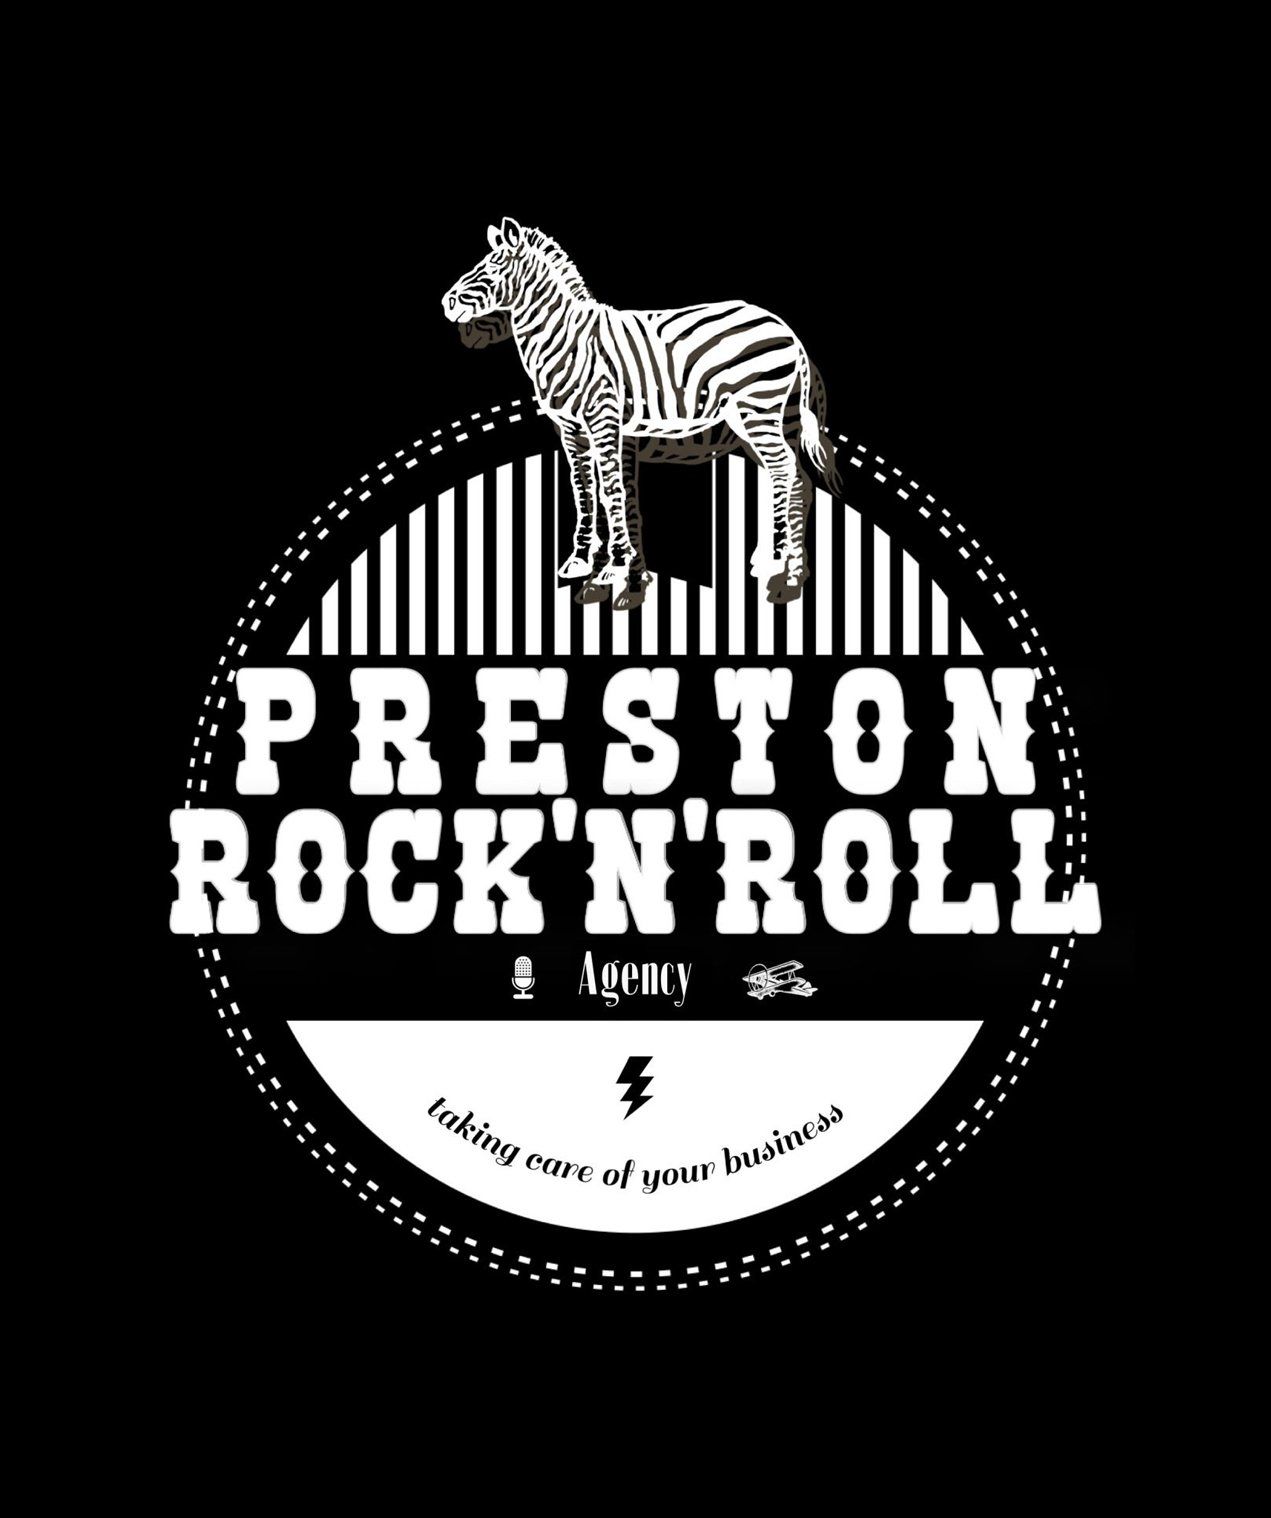 Preston Rock 'n' Roll Agency - We take care of your Business!